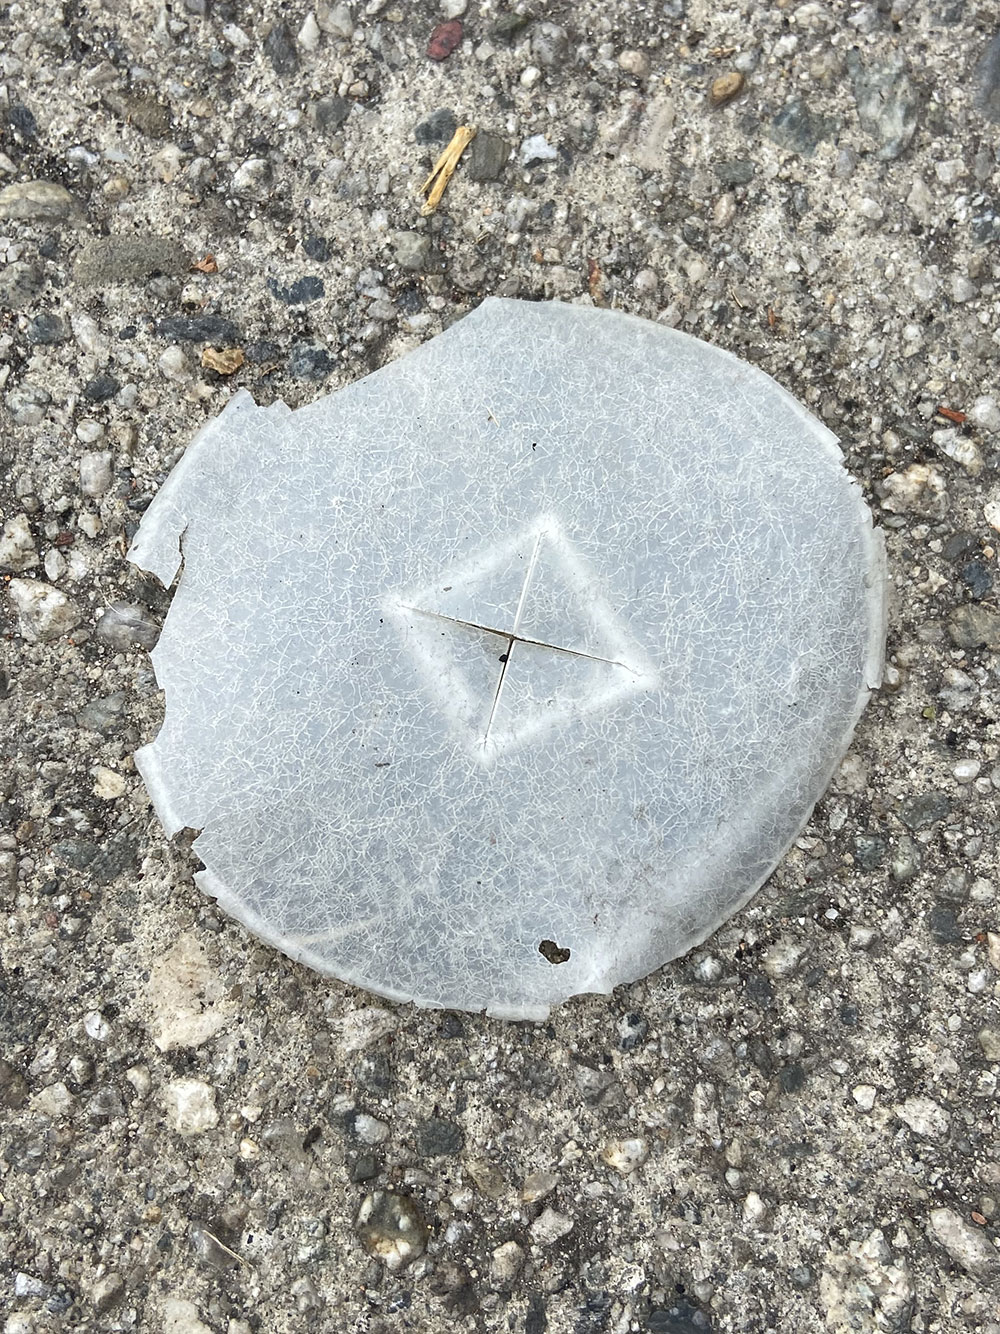 piece of plastic from the top of a to-go soda cup